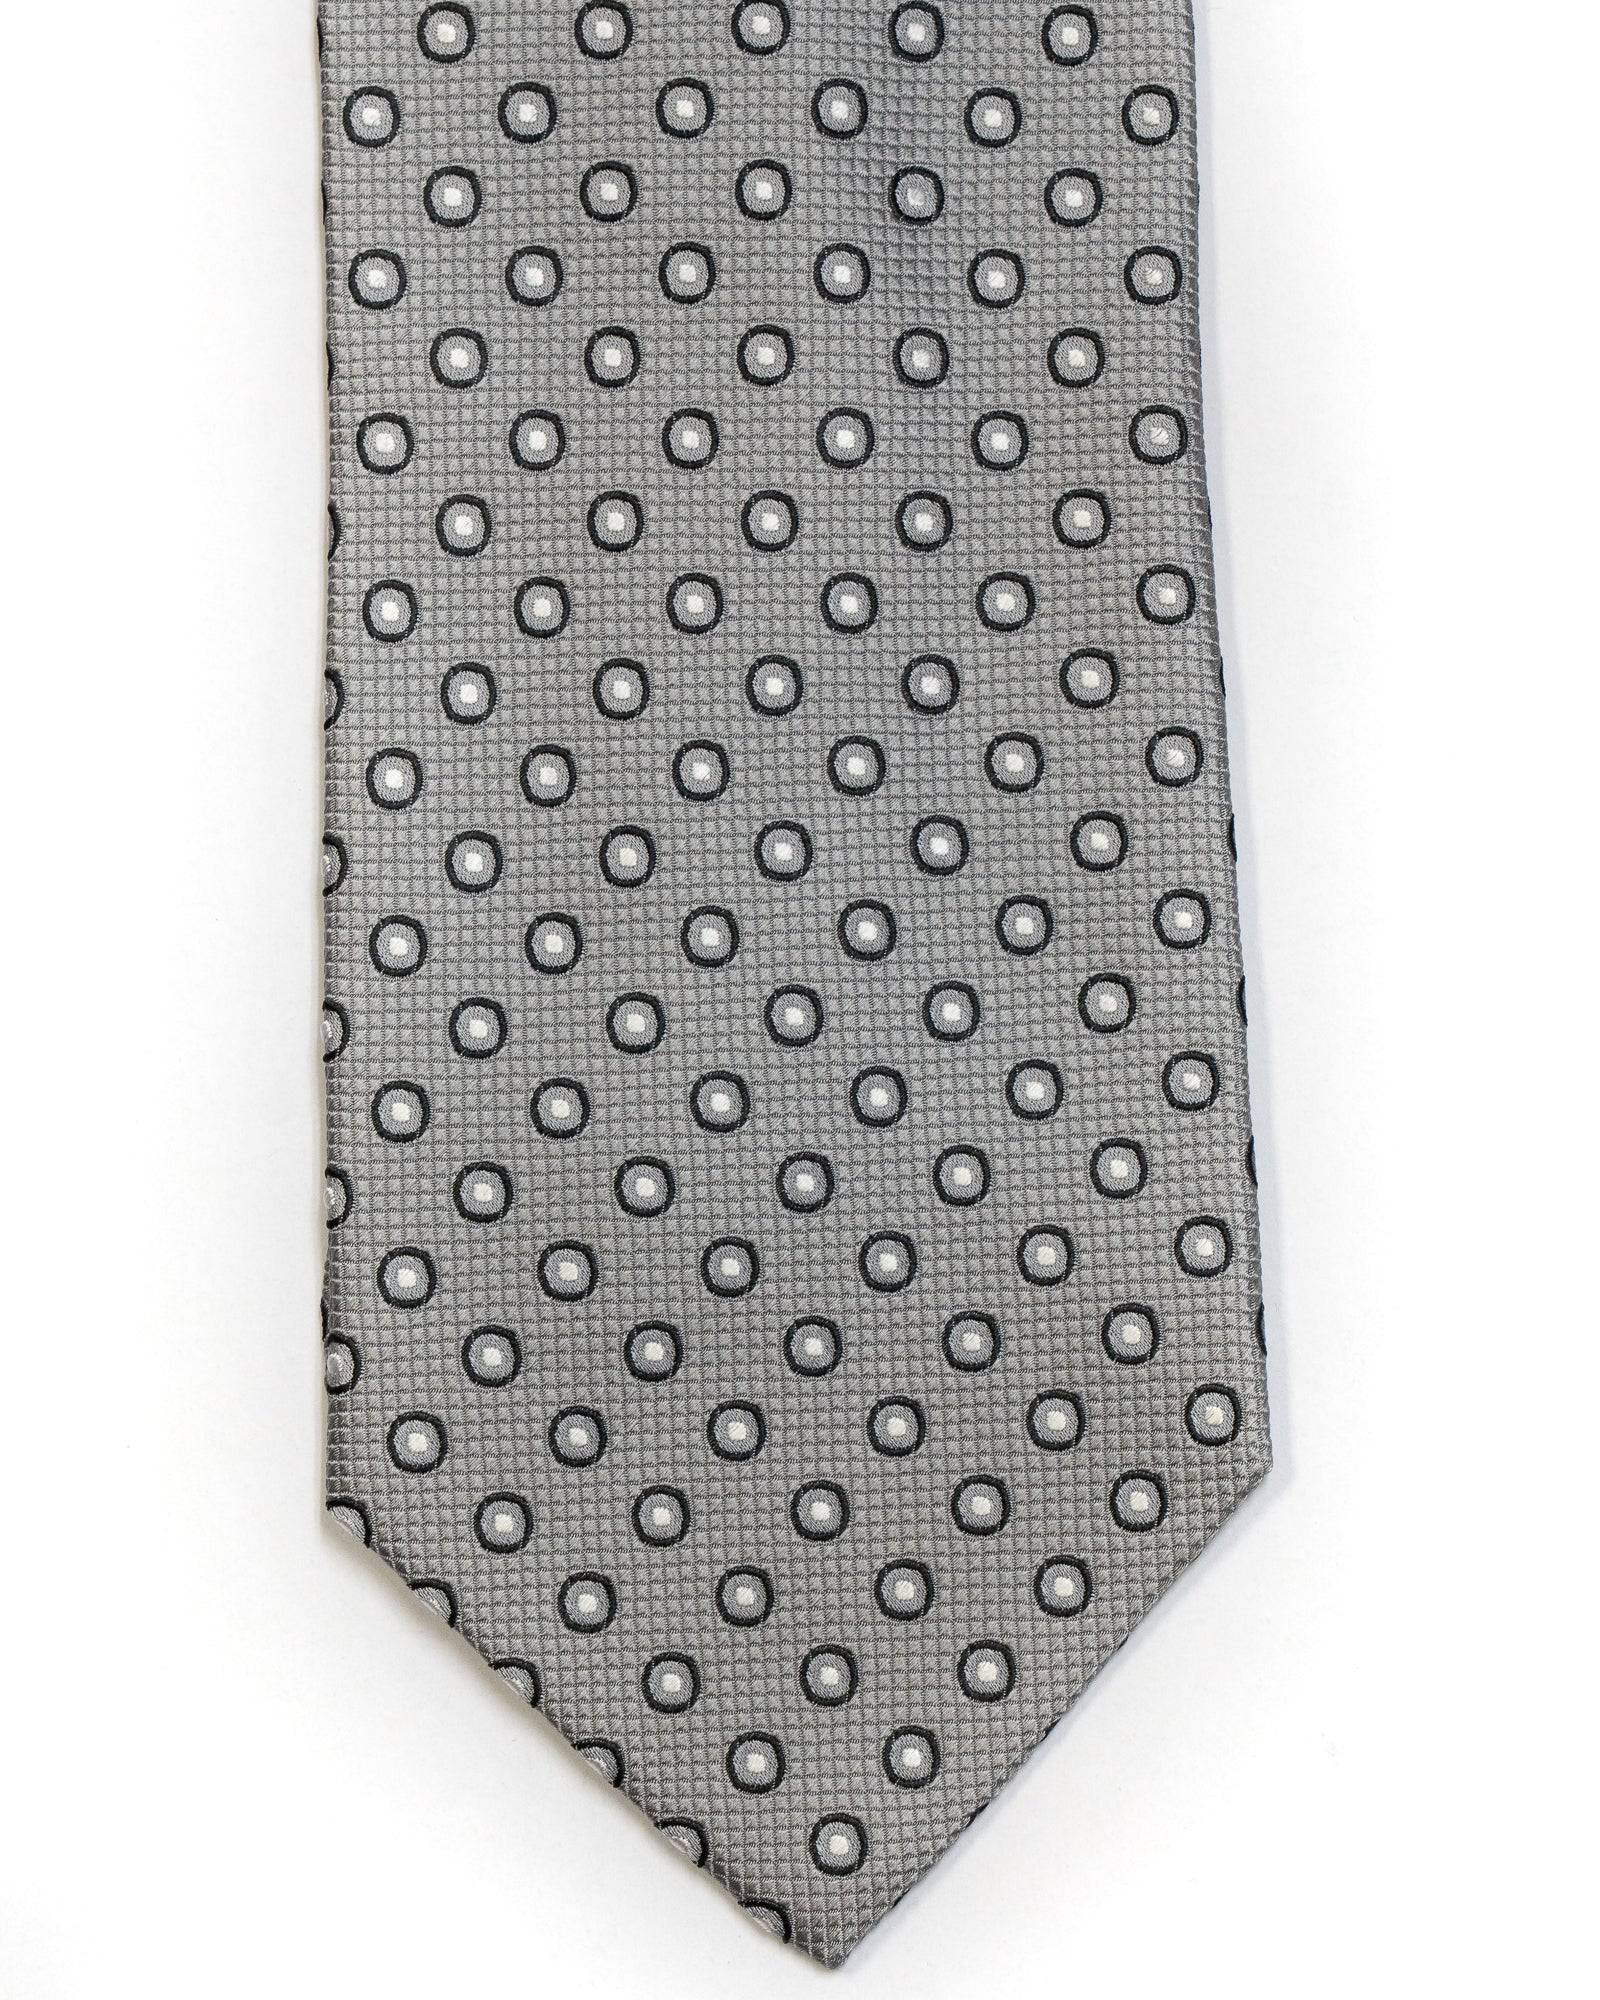 Silk Tie In Silver With Black Circle Foulard Design - Rainwater's Men's Clothing and Tuxedo Rental